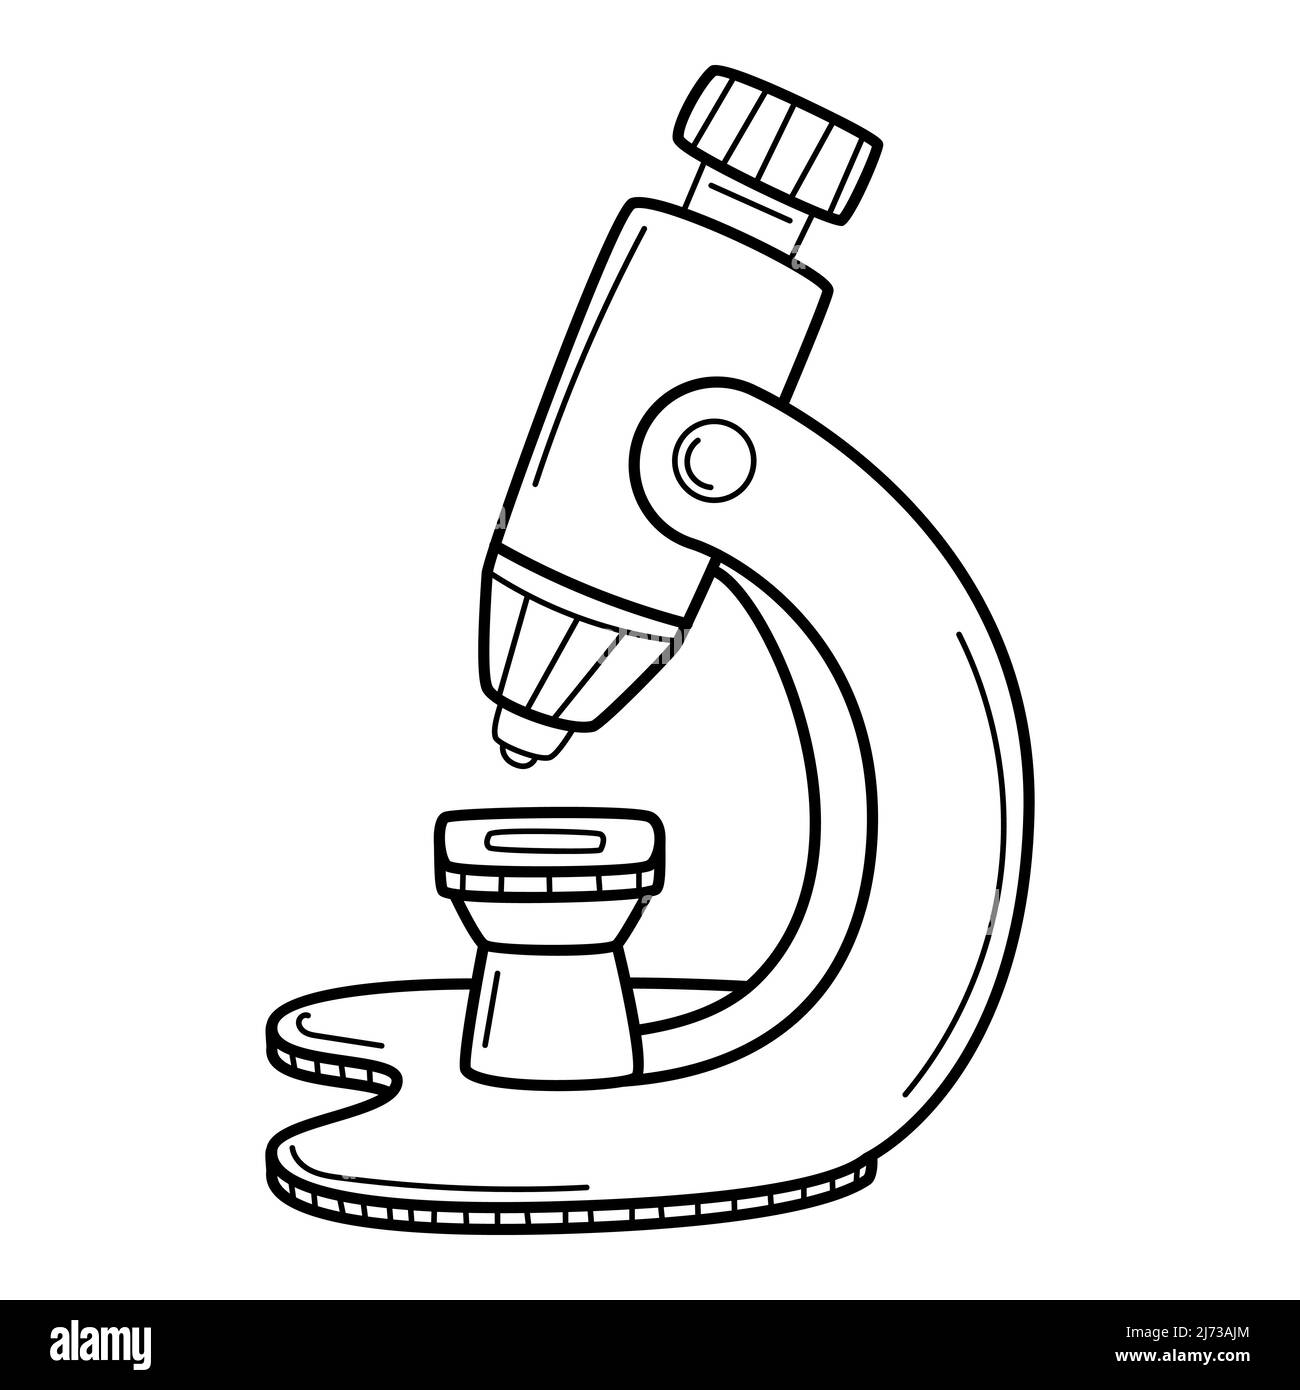 A microscope. Doodle style. An optical device. A symbol of science, biology, study, research. Hand-drawn black and white vector illustration. The desi Stock Vector